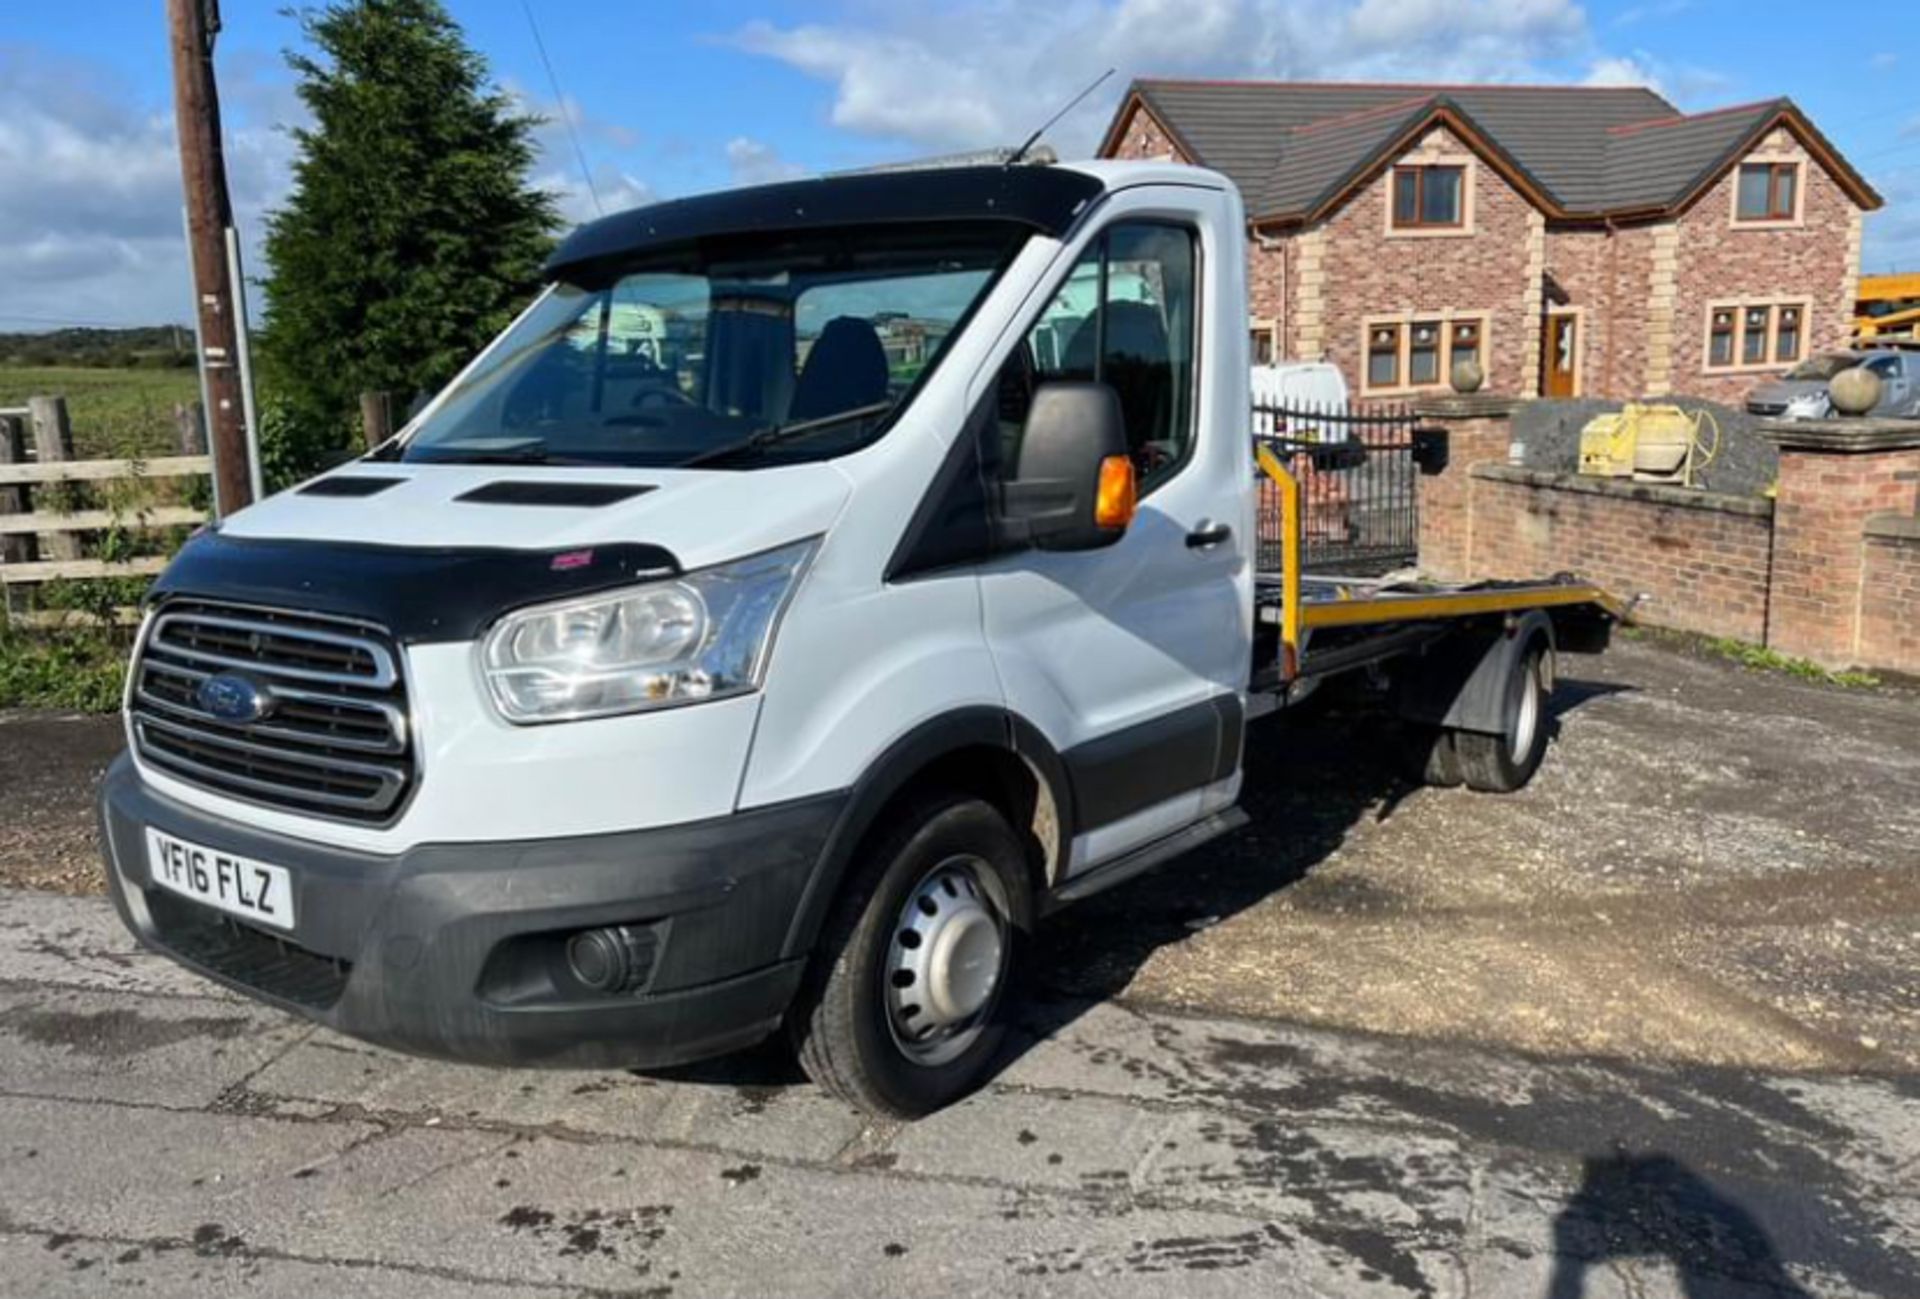 FORD TRANSIT RECOVERY TRUCK - Image 2 of 10